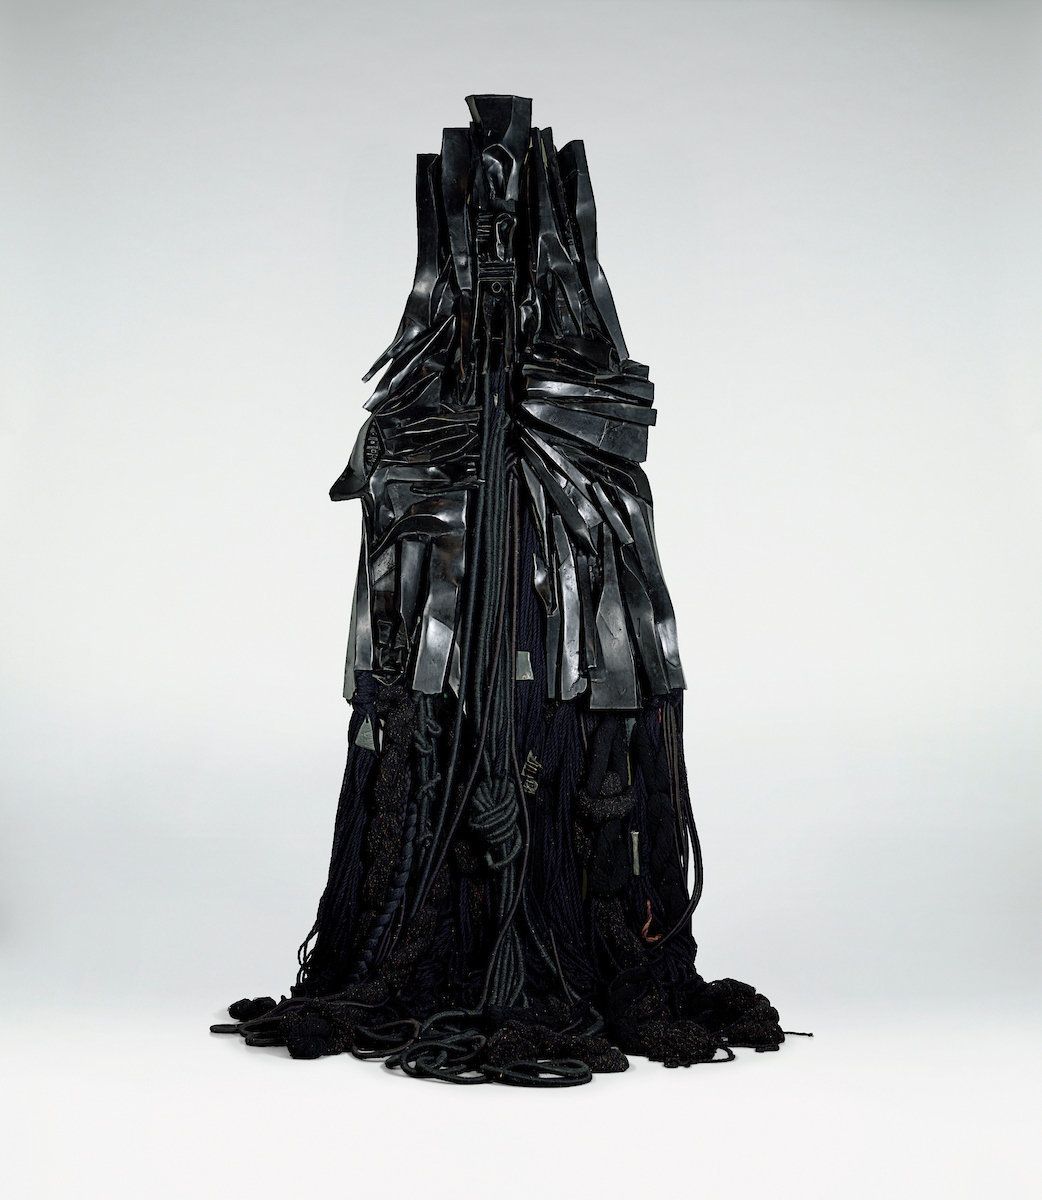 Barbara Chase-Riboud (American, born 1939), "Confessions for Myself," 1972, black patinated bronze with wool, 120 x 40 x 12 inches. 